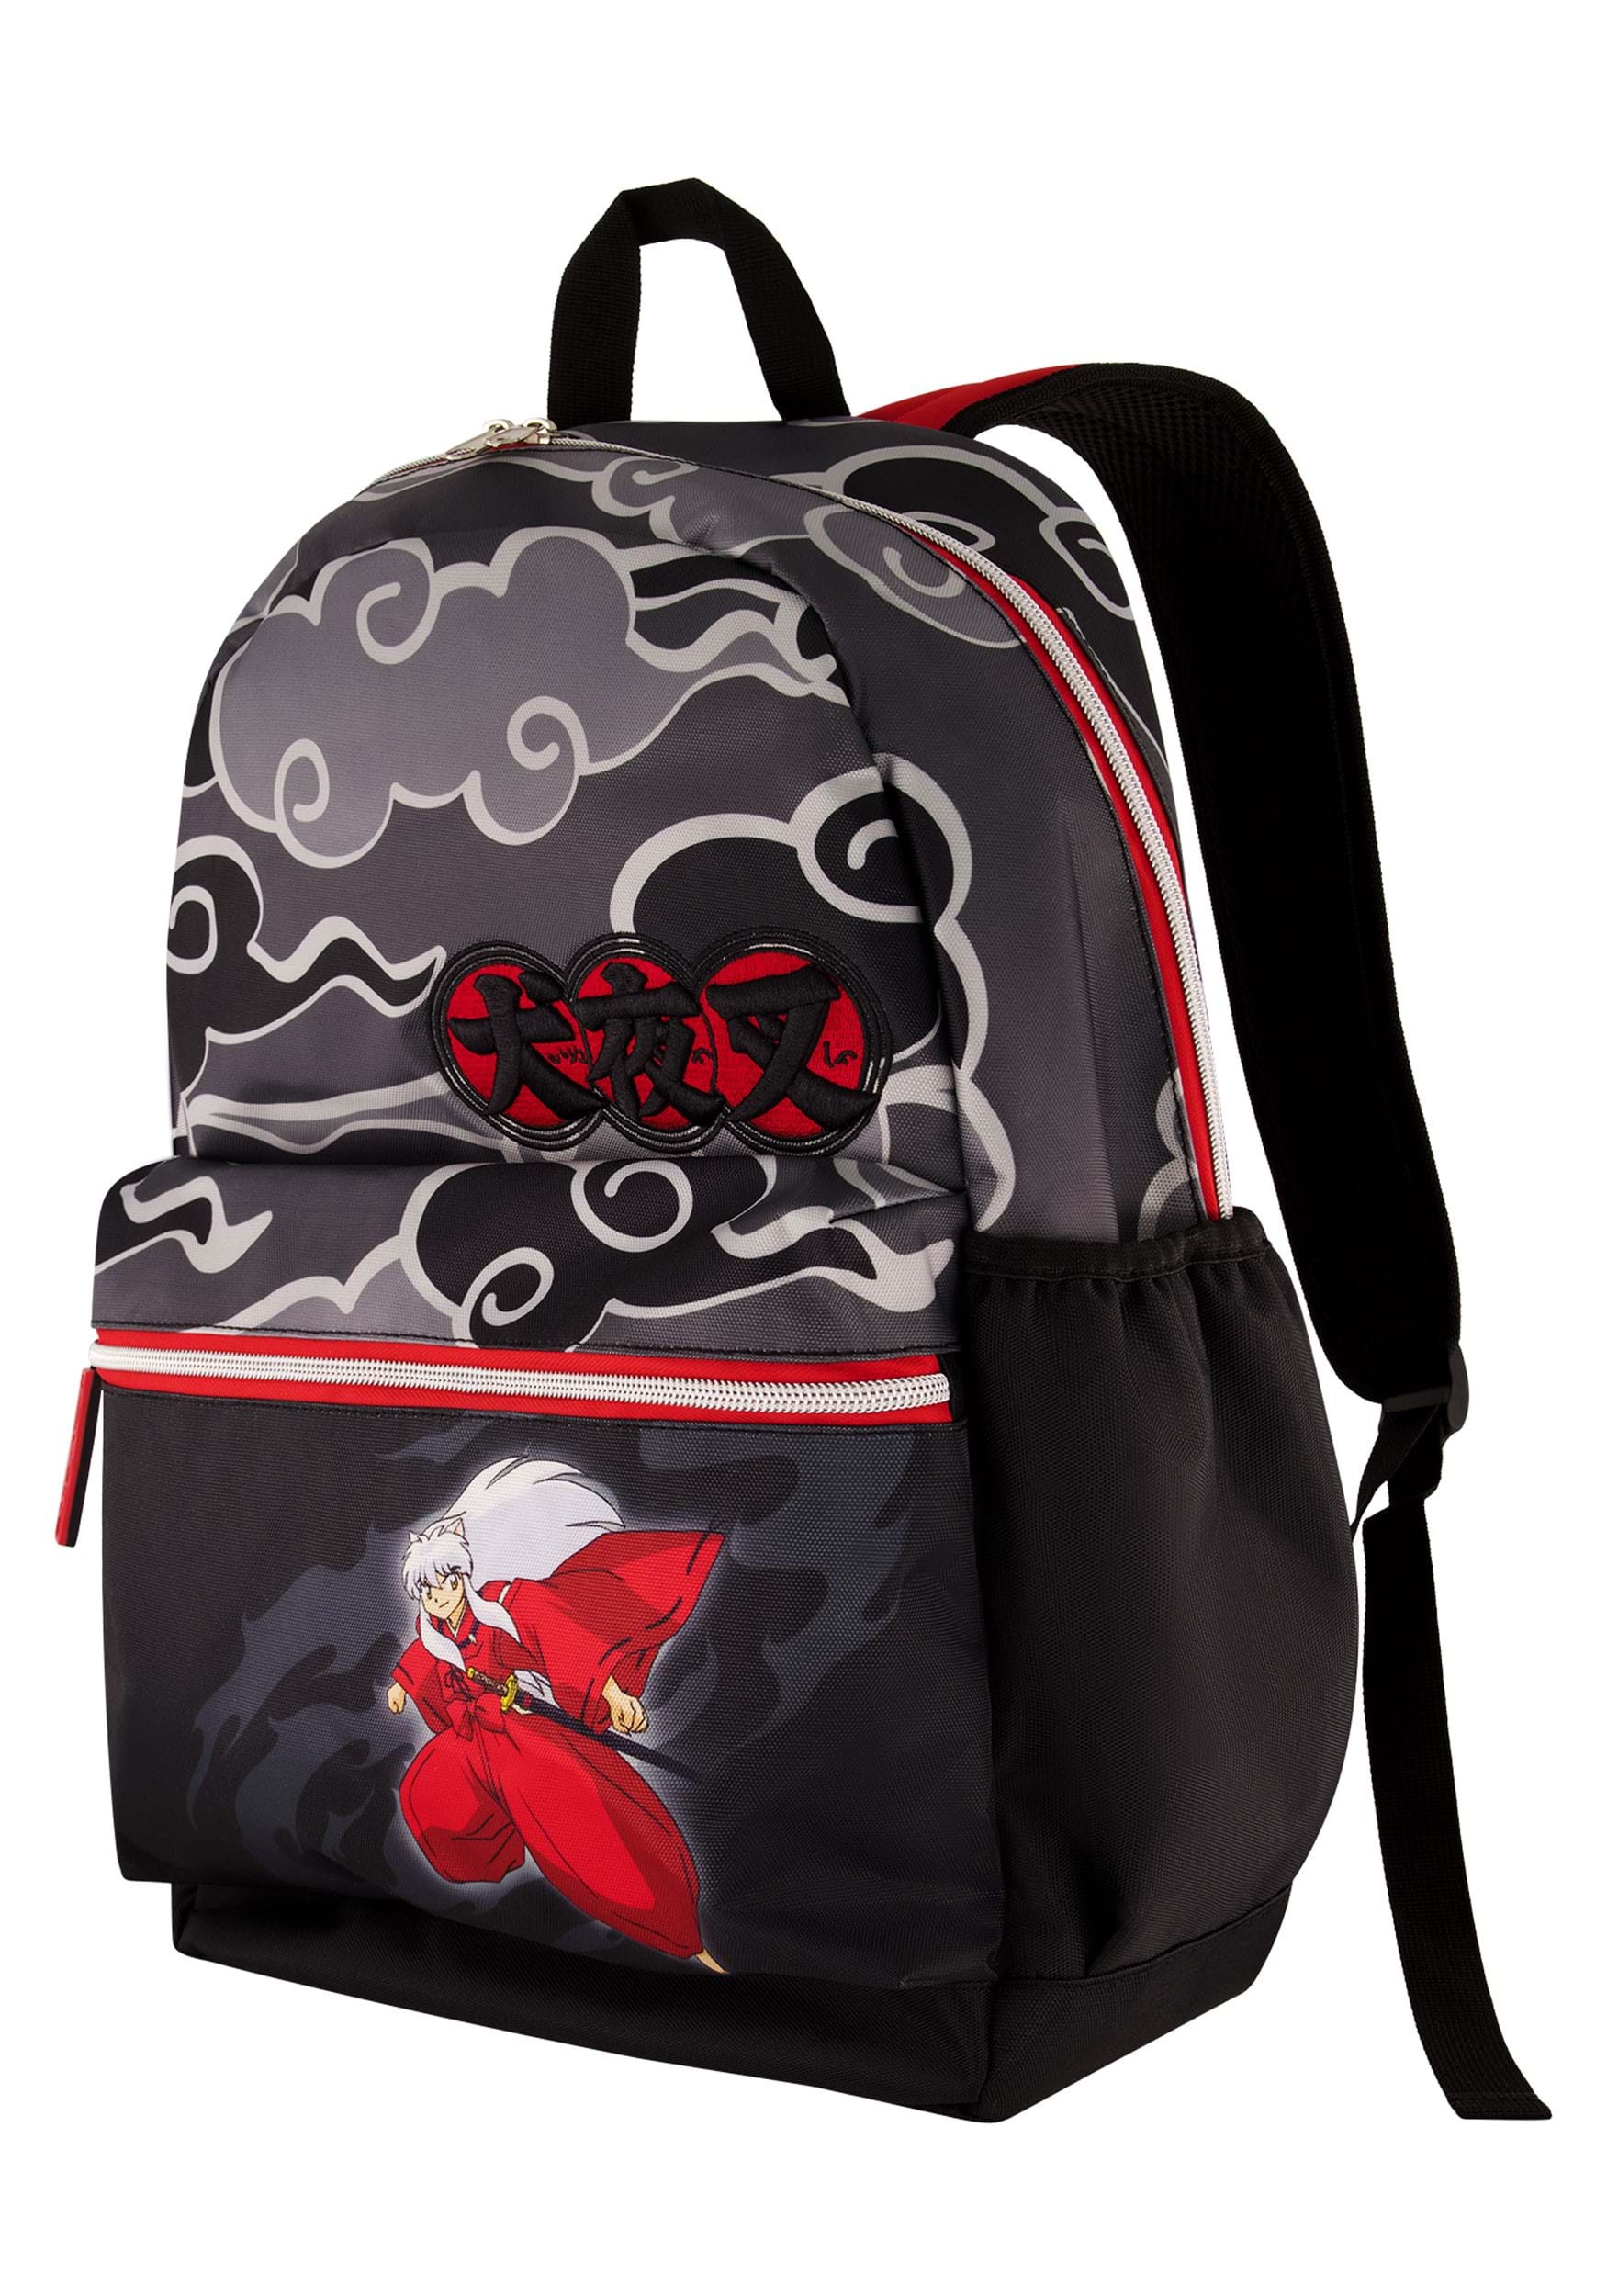 Kawaii Canvas Japanese Style College Backpack